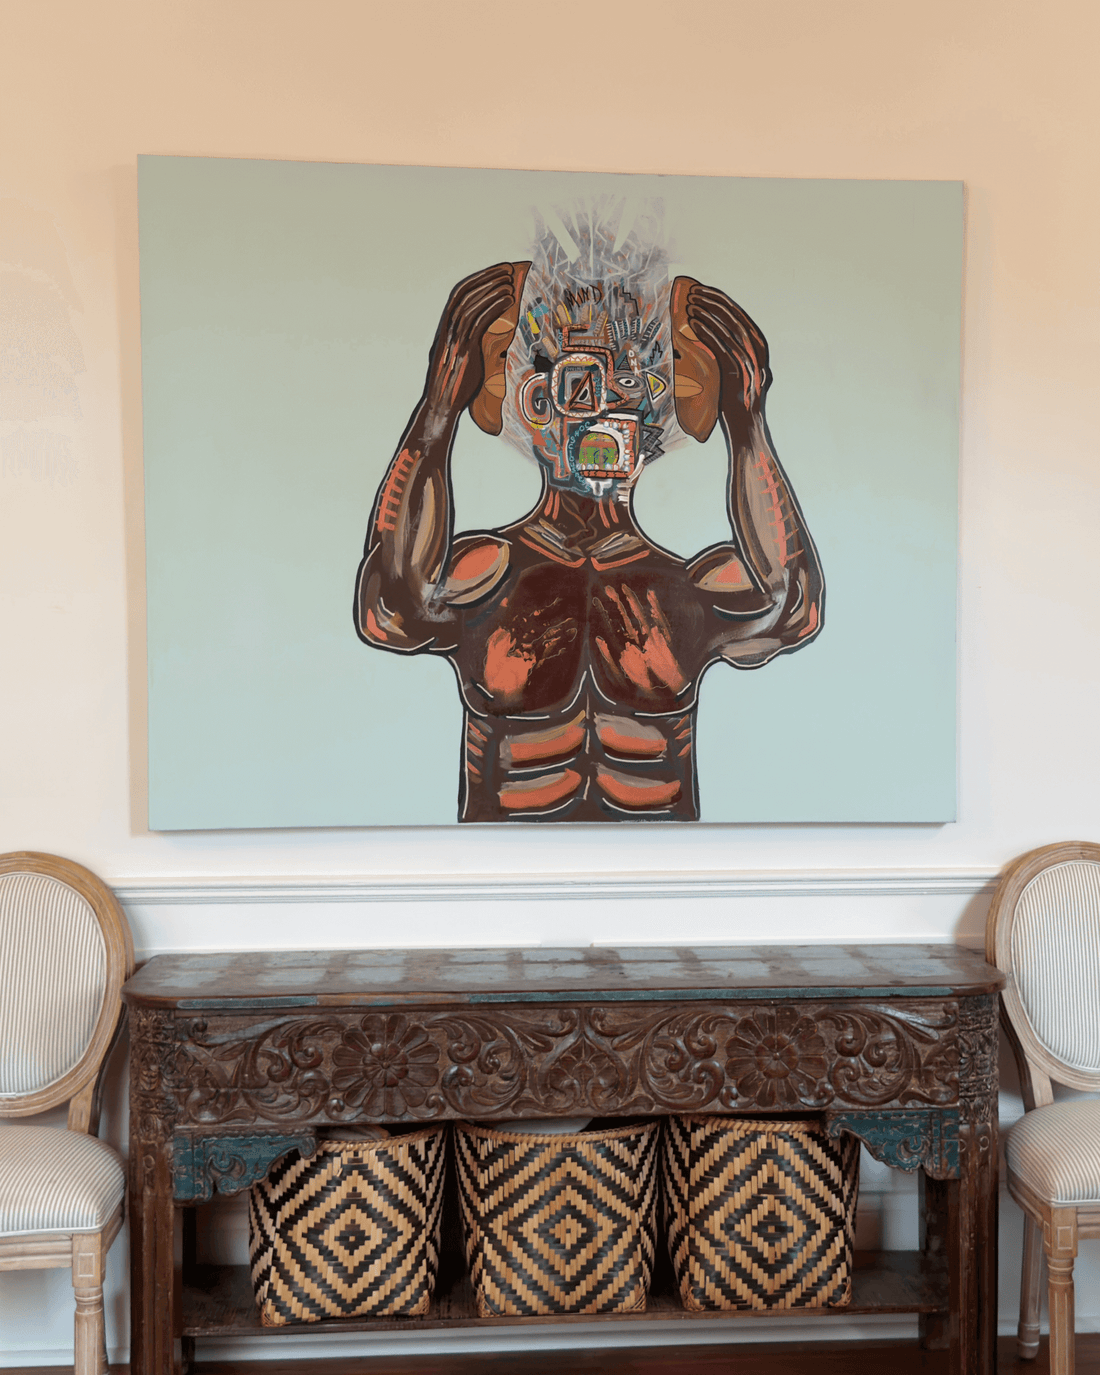 The painting Reveal by Brian Smyre hanging on a wall in a New Orleans home